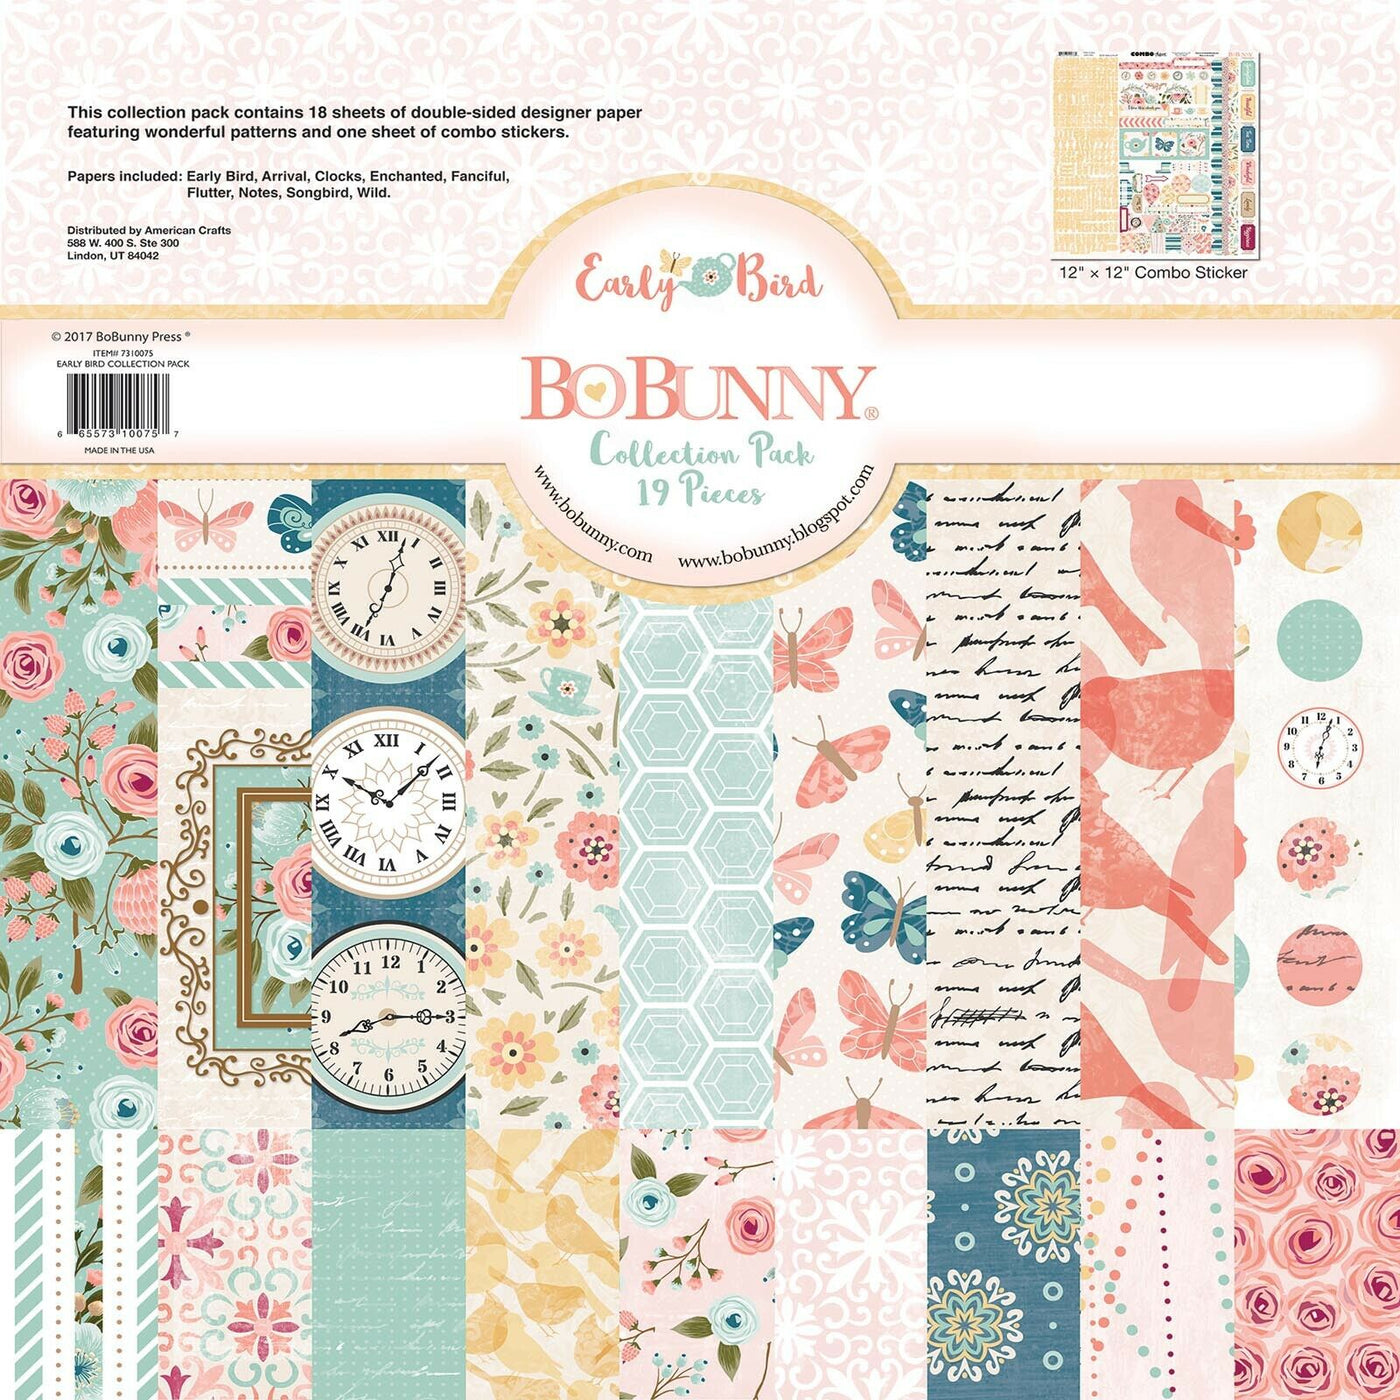 Early Bird 18 pc collection pack from BoBunny Press